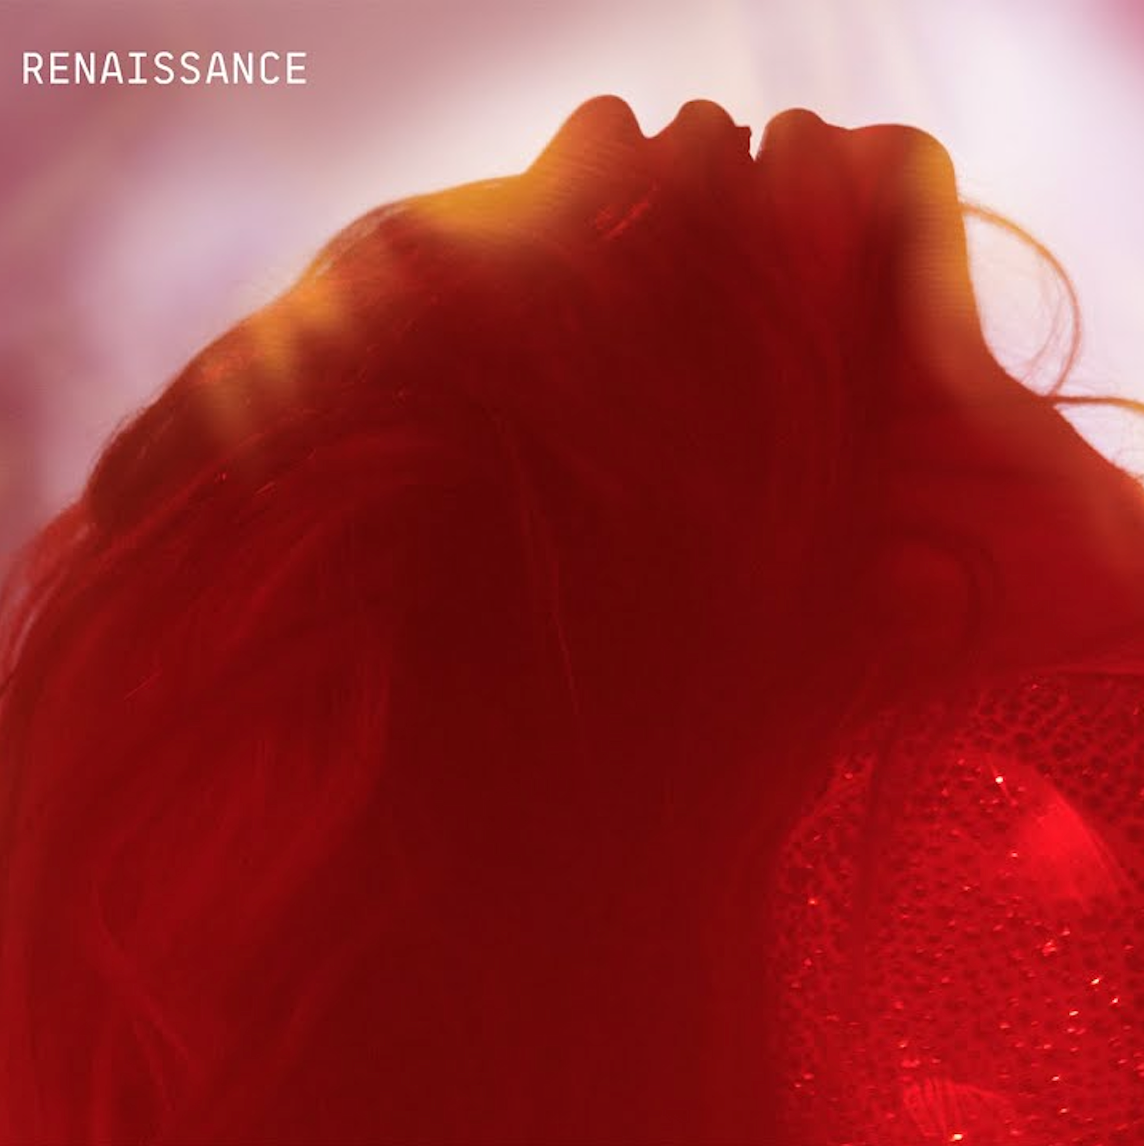 Renaissance: A Film by Beyoncé': Tickets, Premiere and How to Watch